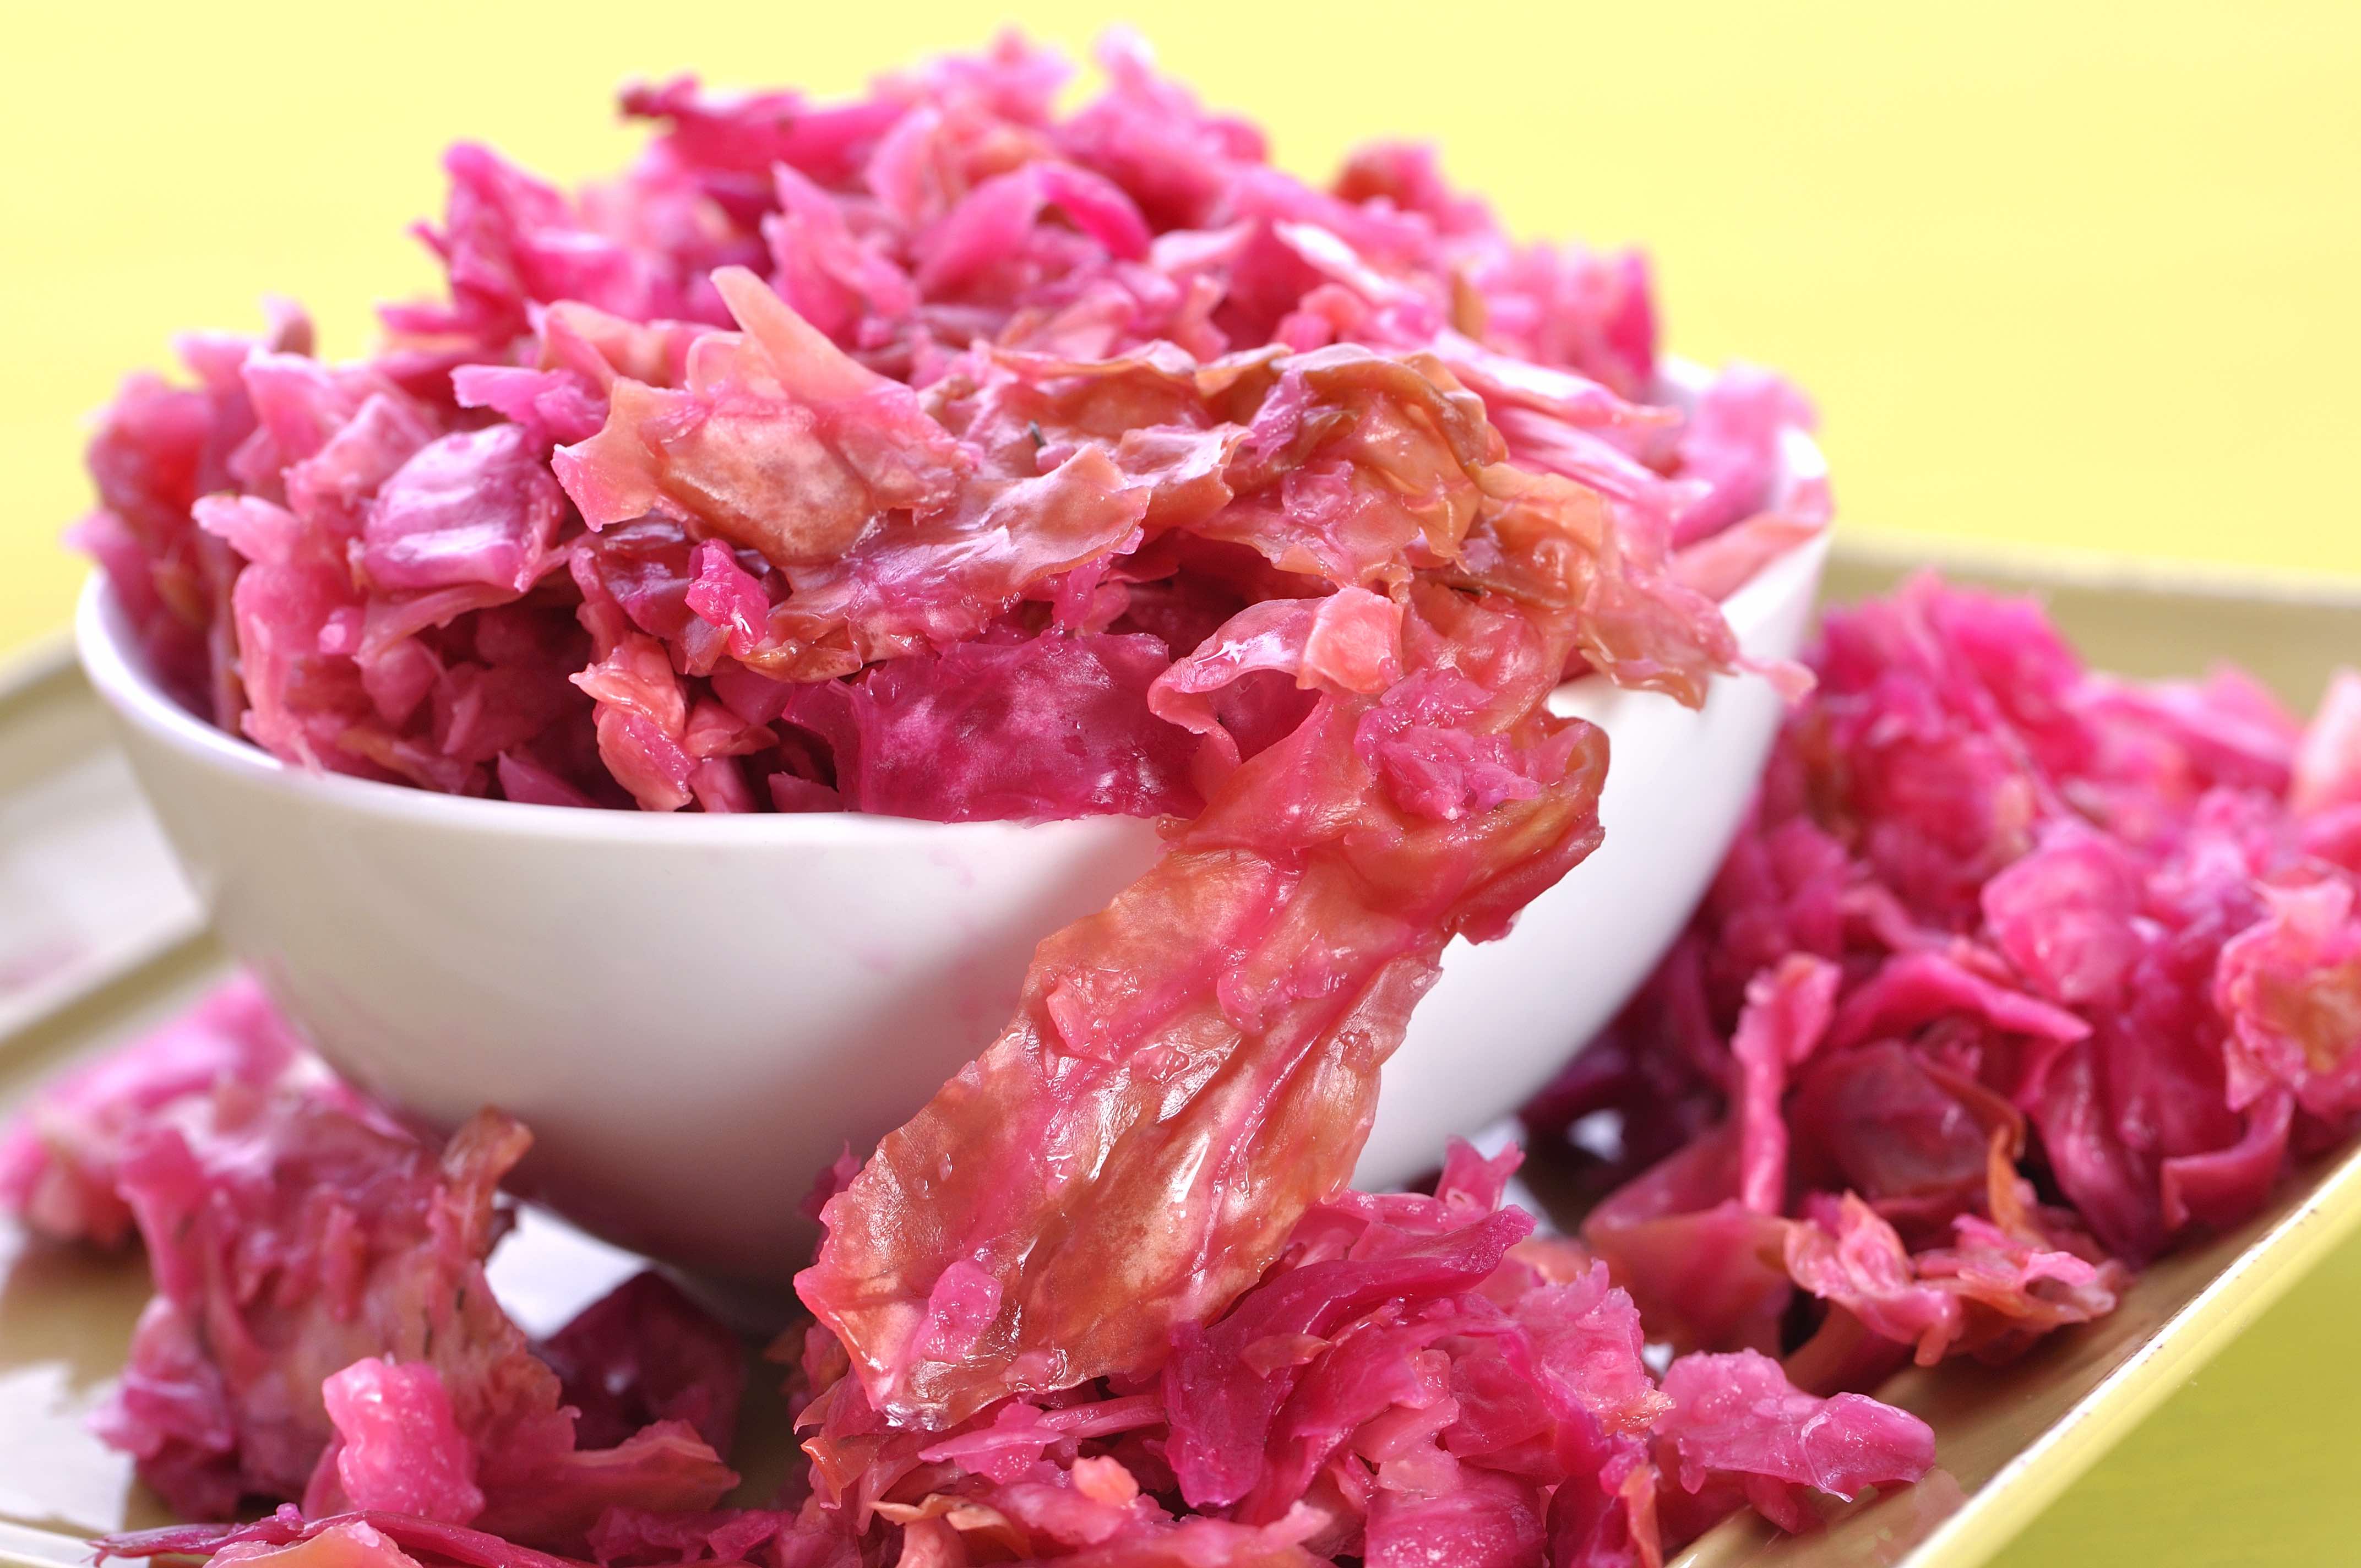 Make Your Own Powerfully Healthy Raw Fermented Veggies – Facebook Live Video